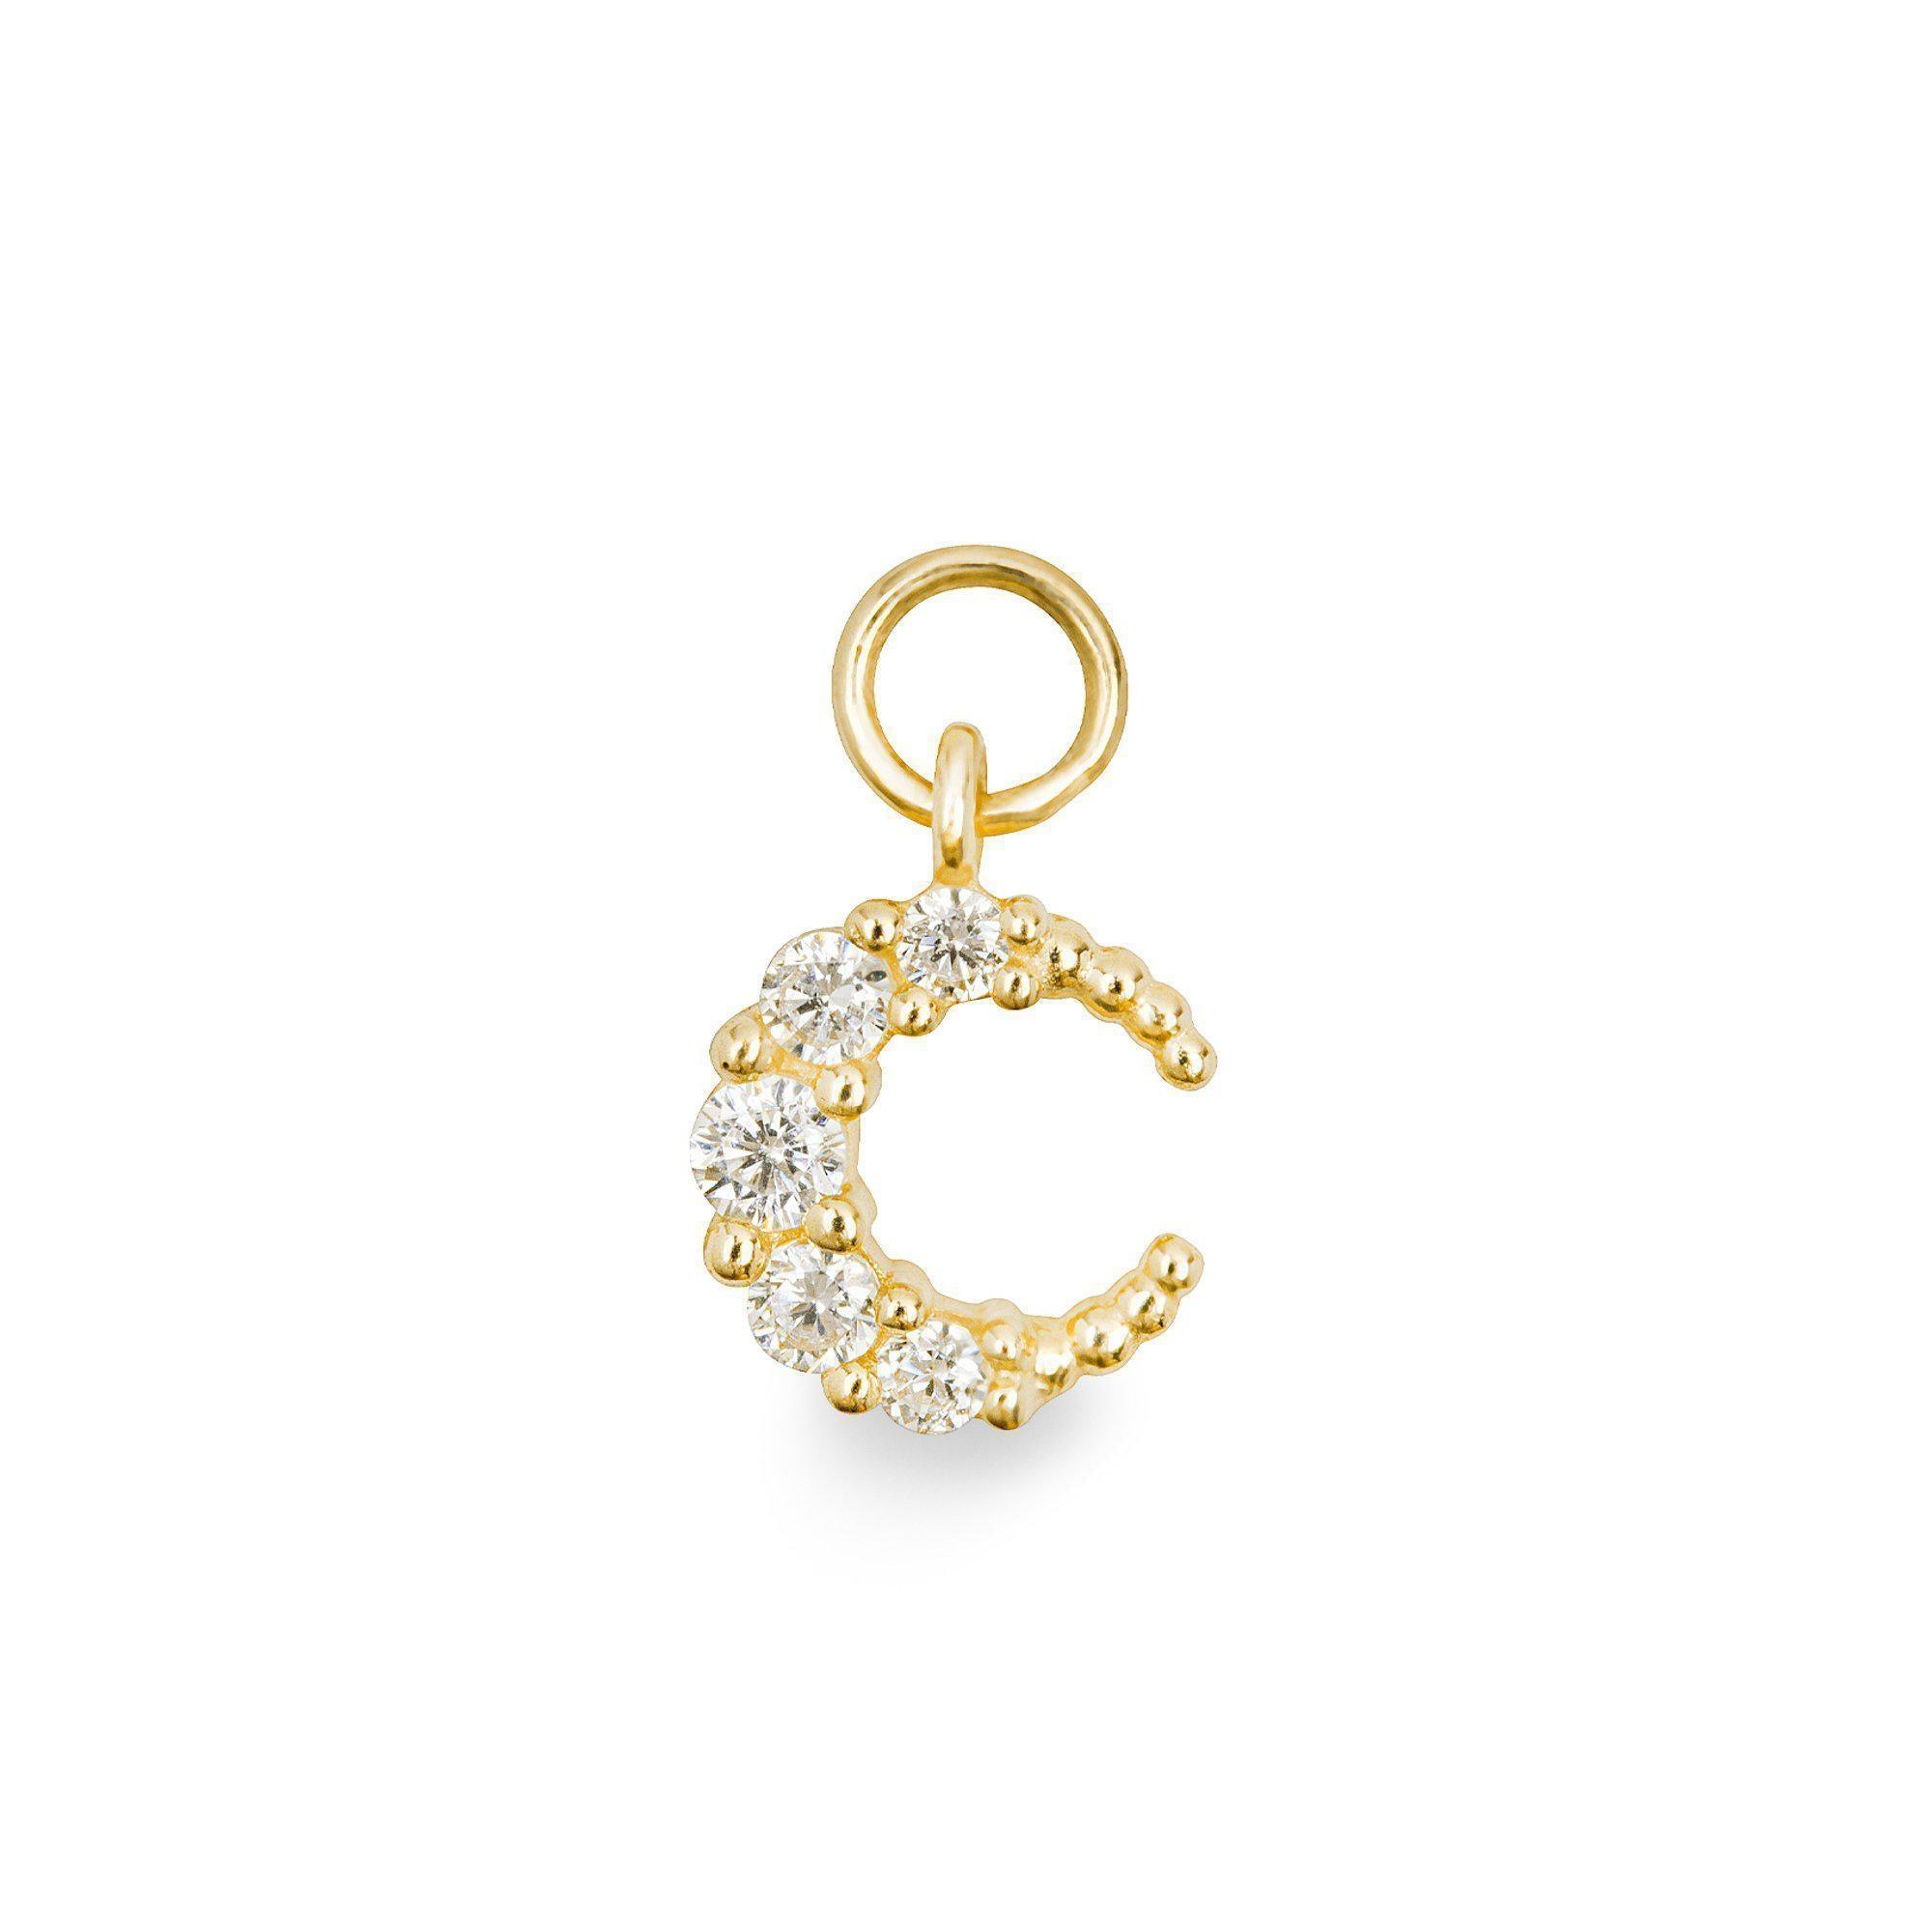 Lune 9k single solid yellow gold tiny moon charm for hinged segment earring - Helix & Conch